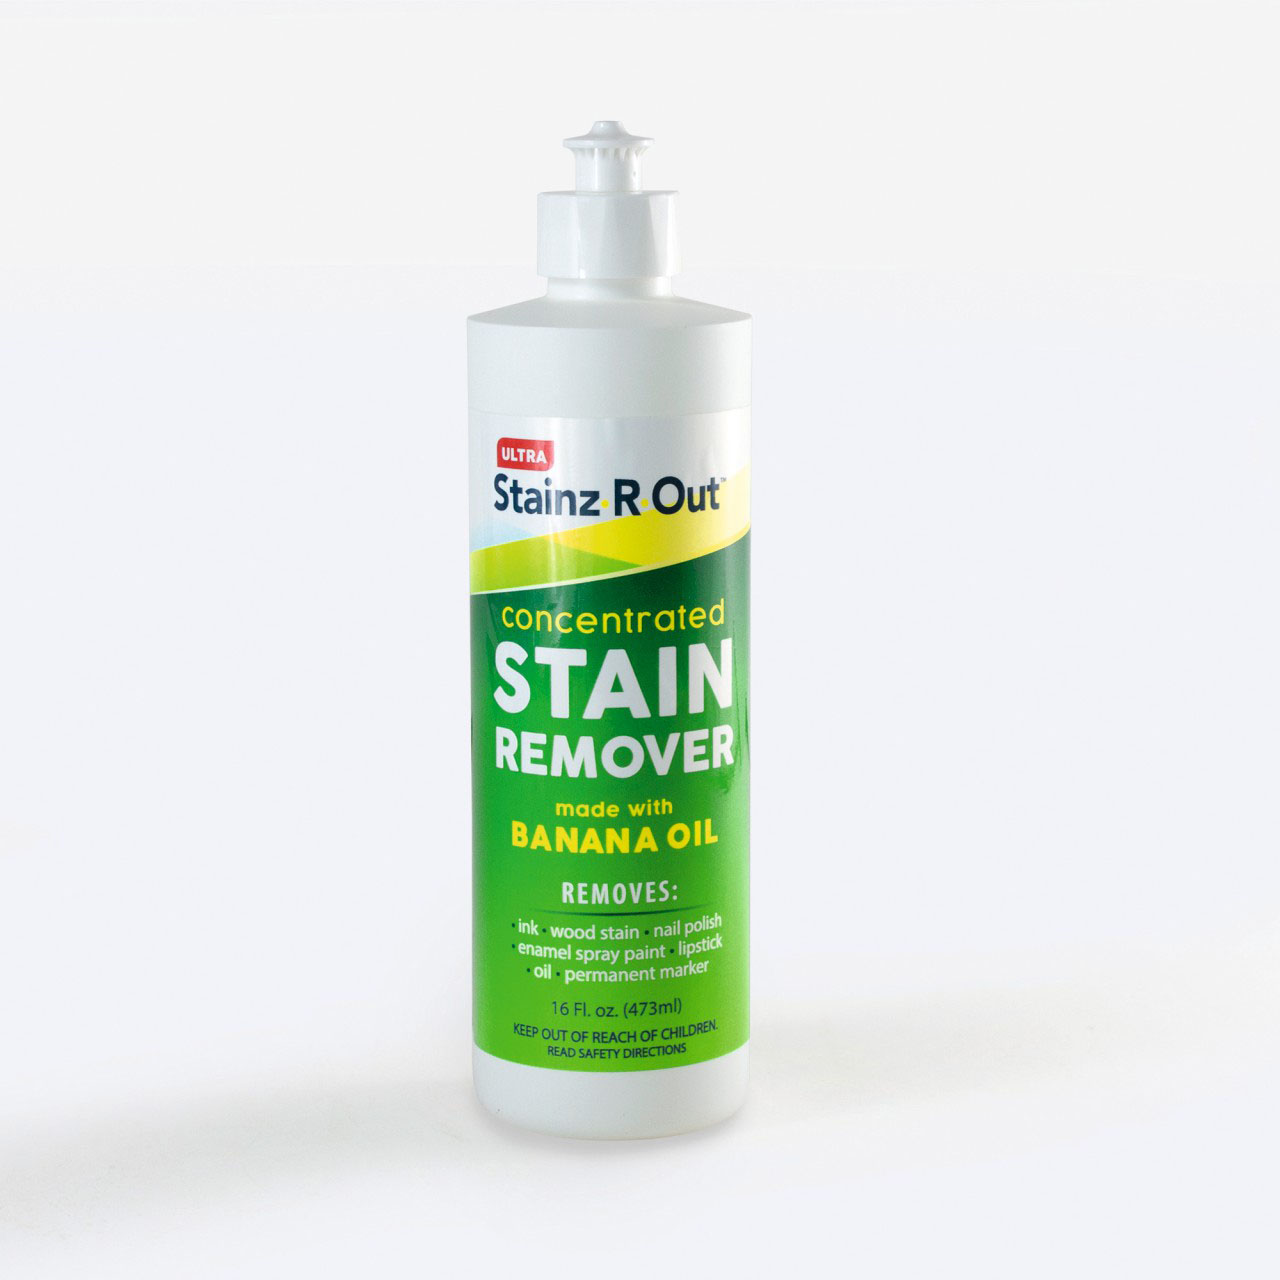 Stainz-R-Out Cleaner